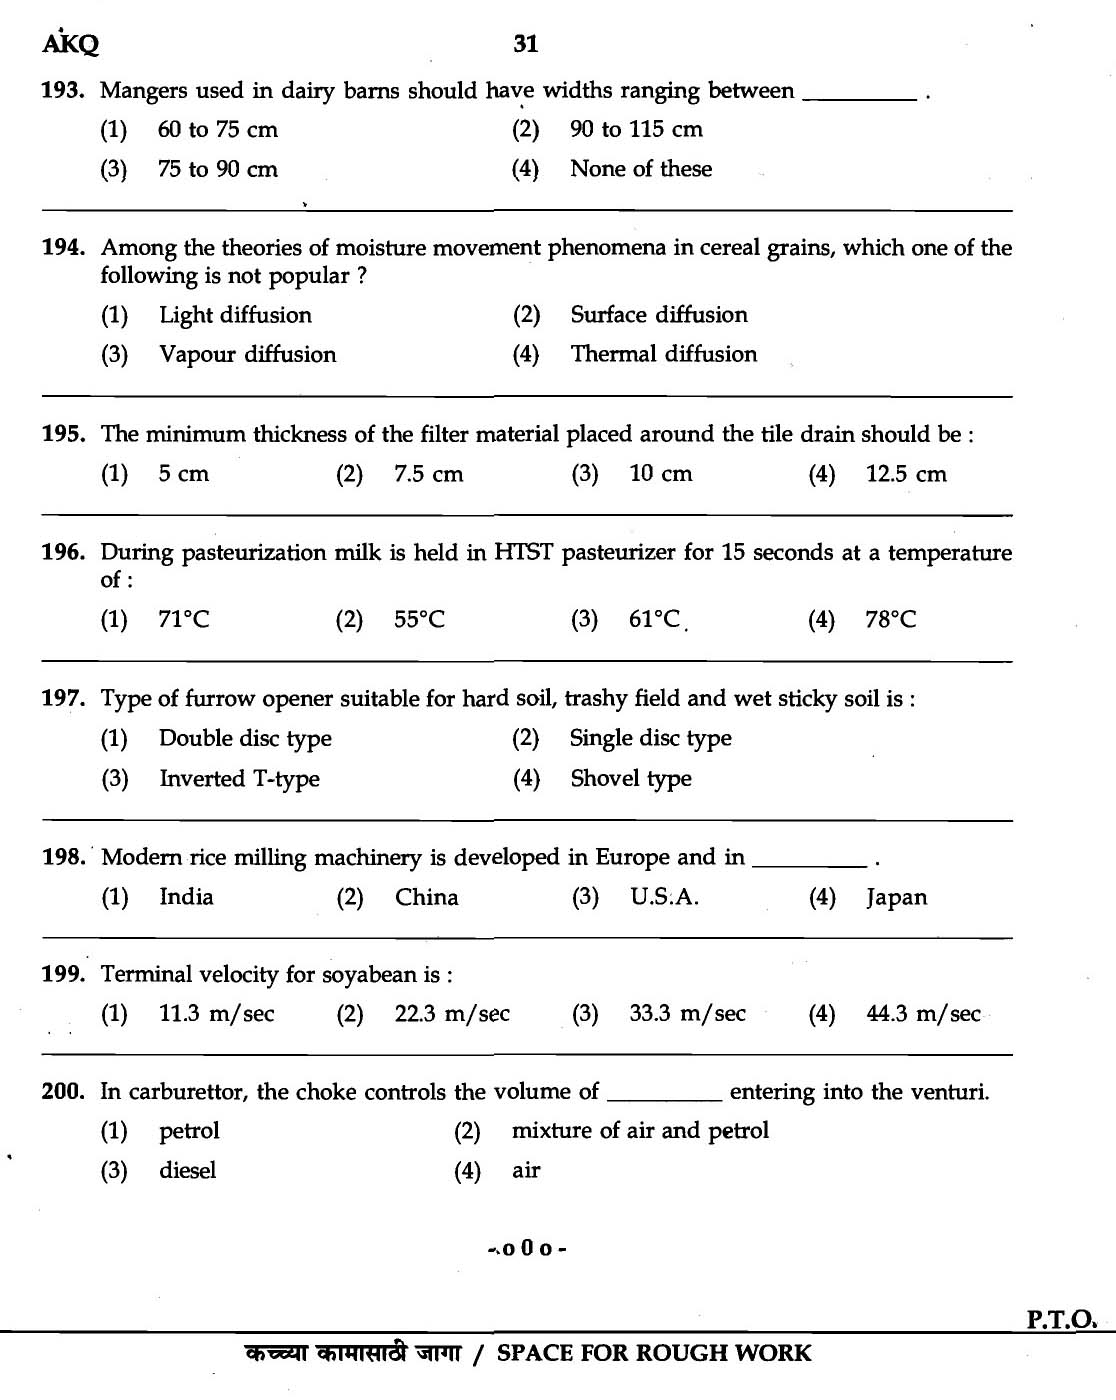 MPSC Agricultural Services Exam 2007 Question Paper Agricultural Engineering 29